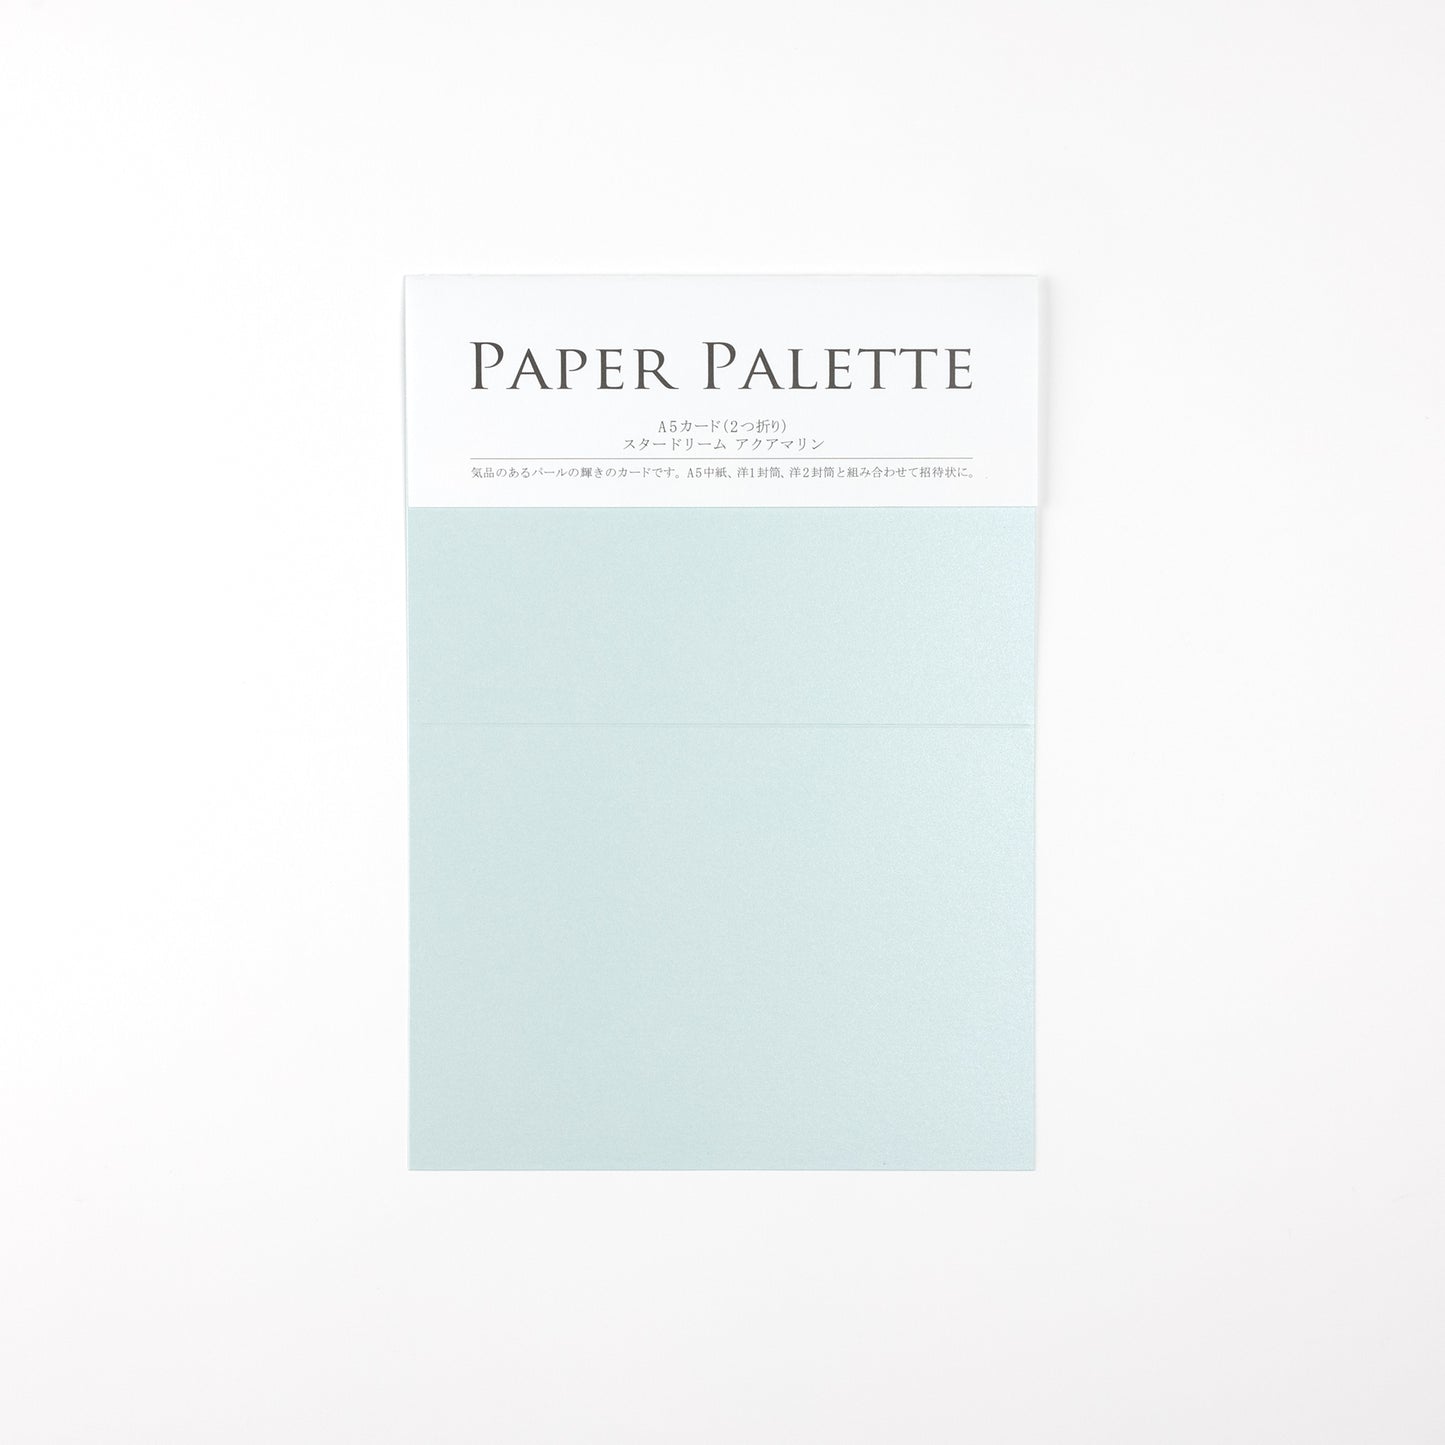 PAPER PALETTE A5 スタードリーム アクアマリン